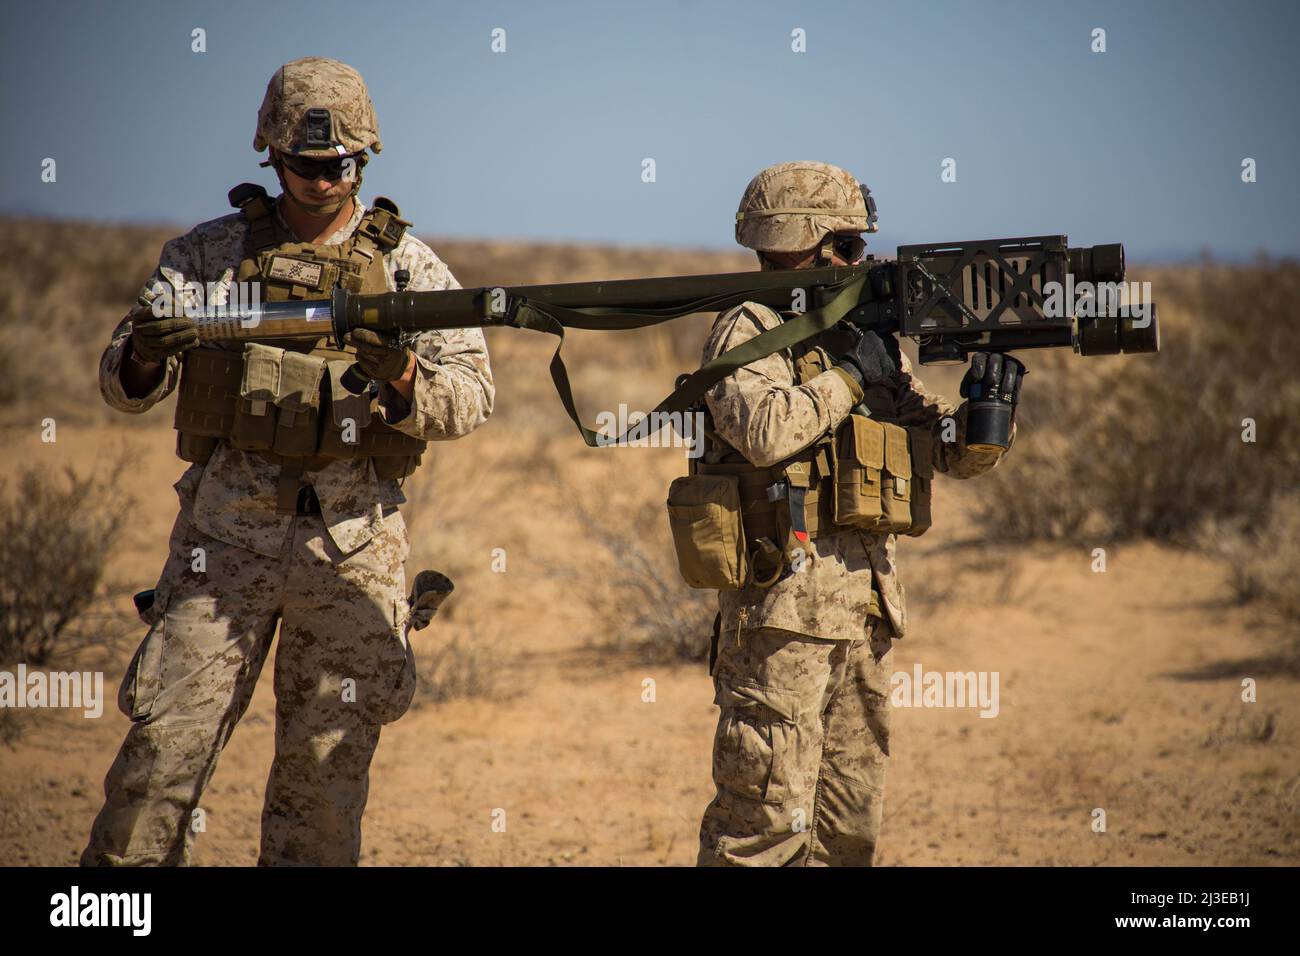 U.S. Marines with Ground Base Air Defense, Marine Aviation Weapons and Tactics Squadron One (MAWTS-1) load an FIM-92 Stinger, during Weapons and Tactics Instructor (WTI) course 2-22, at Auxiliary Airfield II, near Yuma, Arizona, April 5, 2022. WTI is a seven-week training event hosted by MAWTS-1, providing standardized advanced tactical training and certification of unit instructor qualifications to support Marine aviation training and readiness, and assists in developing and employing aviation weapons and tactics. (U.S. Marine Corps photo by Lance Cpl. Dean Gurule) Stock Photo